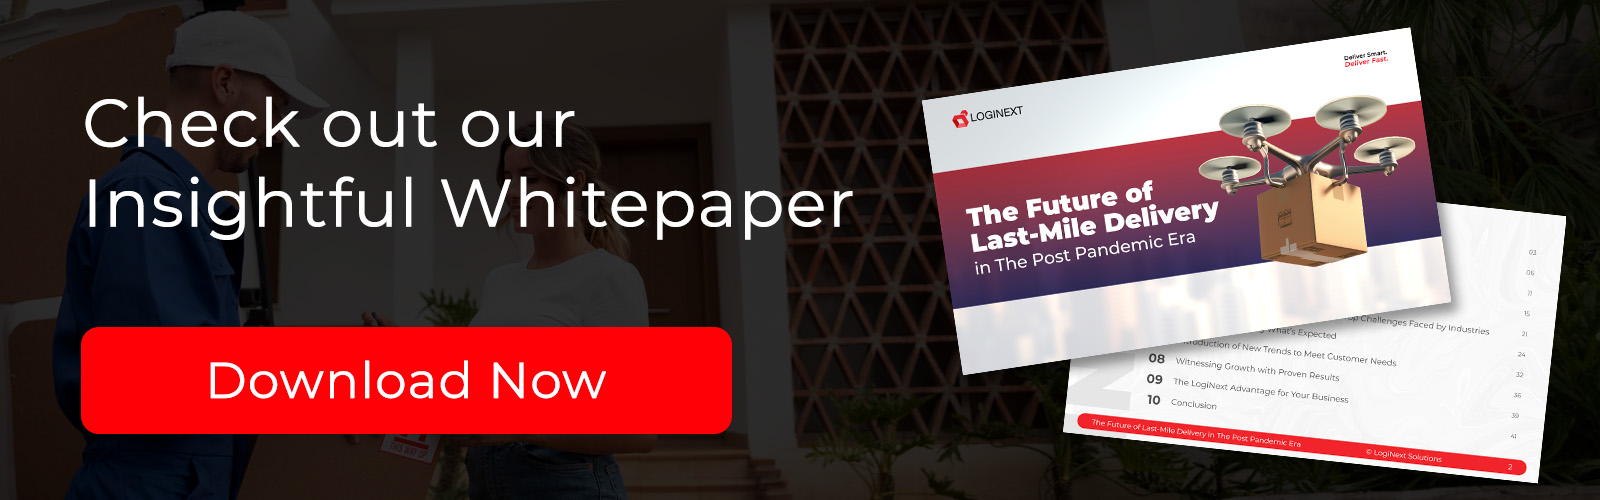 Download White Paper on Last Mile Delivery